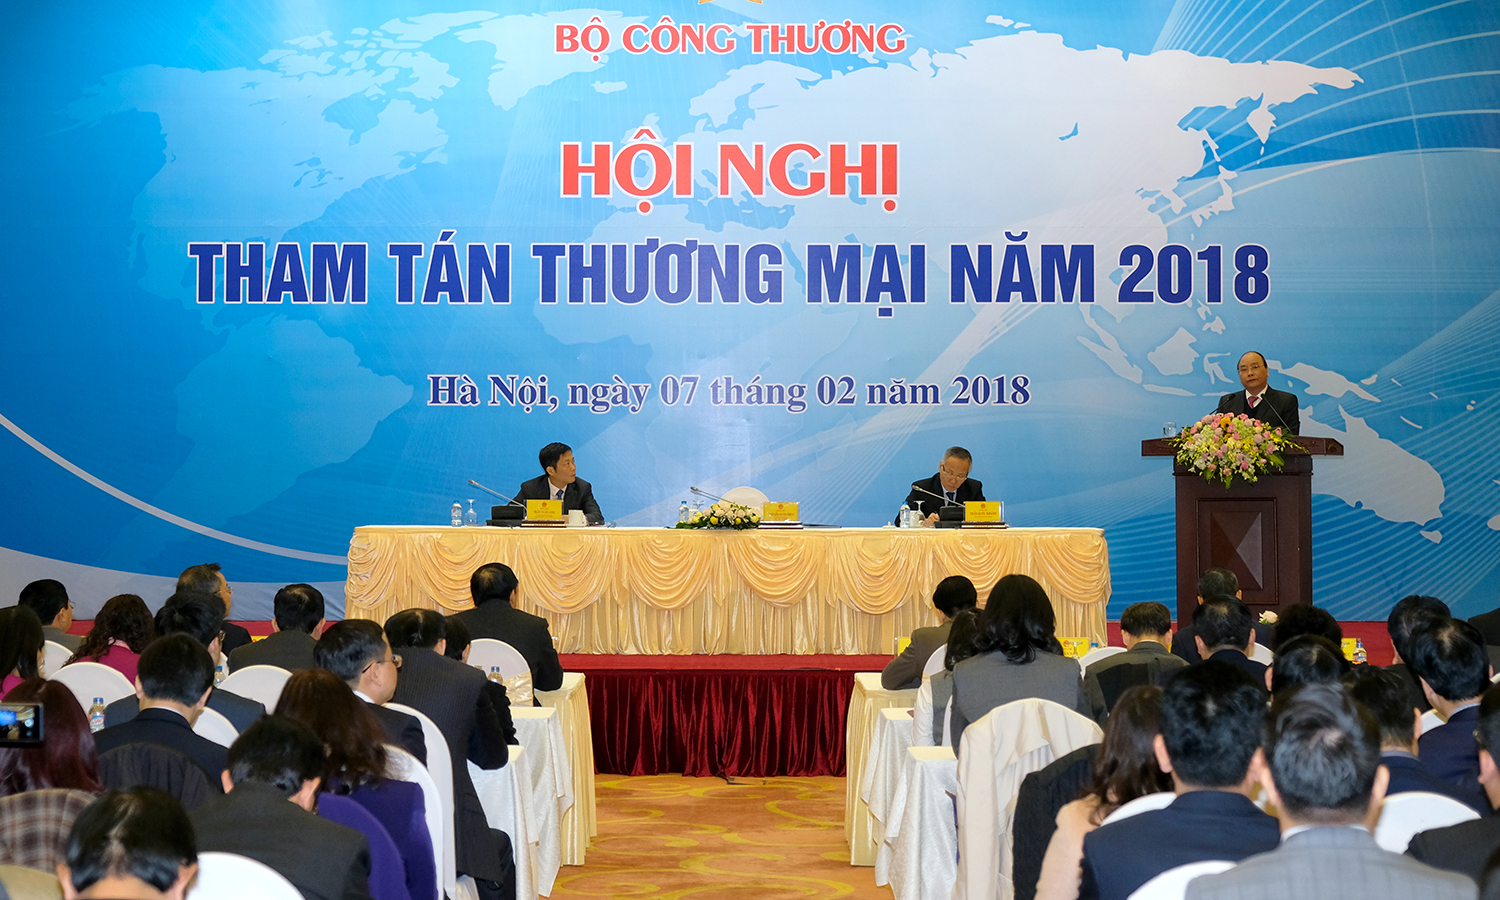 Vietnam's Prime Minister Nguyen Xuan Phuc delivers remarks at a conference in Hanoi on February 7, 2018. Photo: VGP